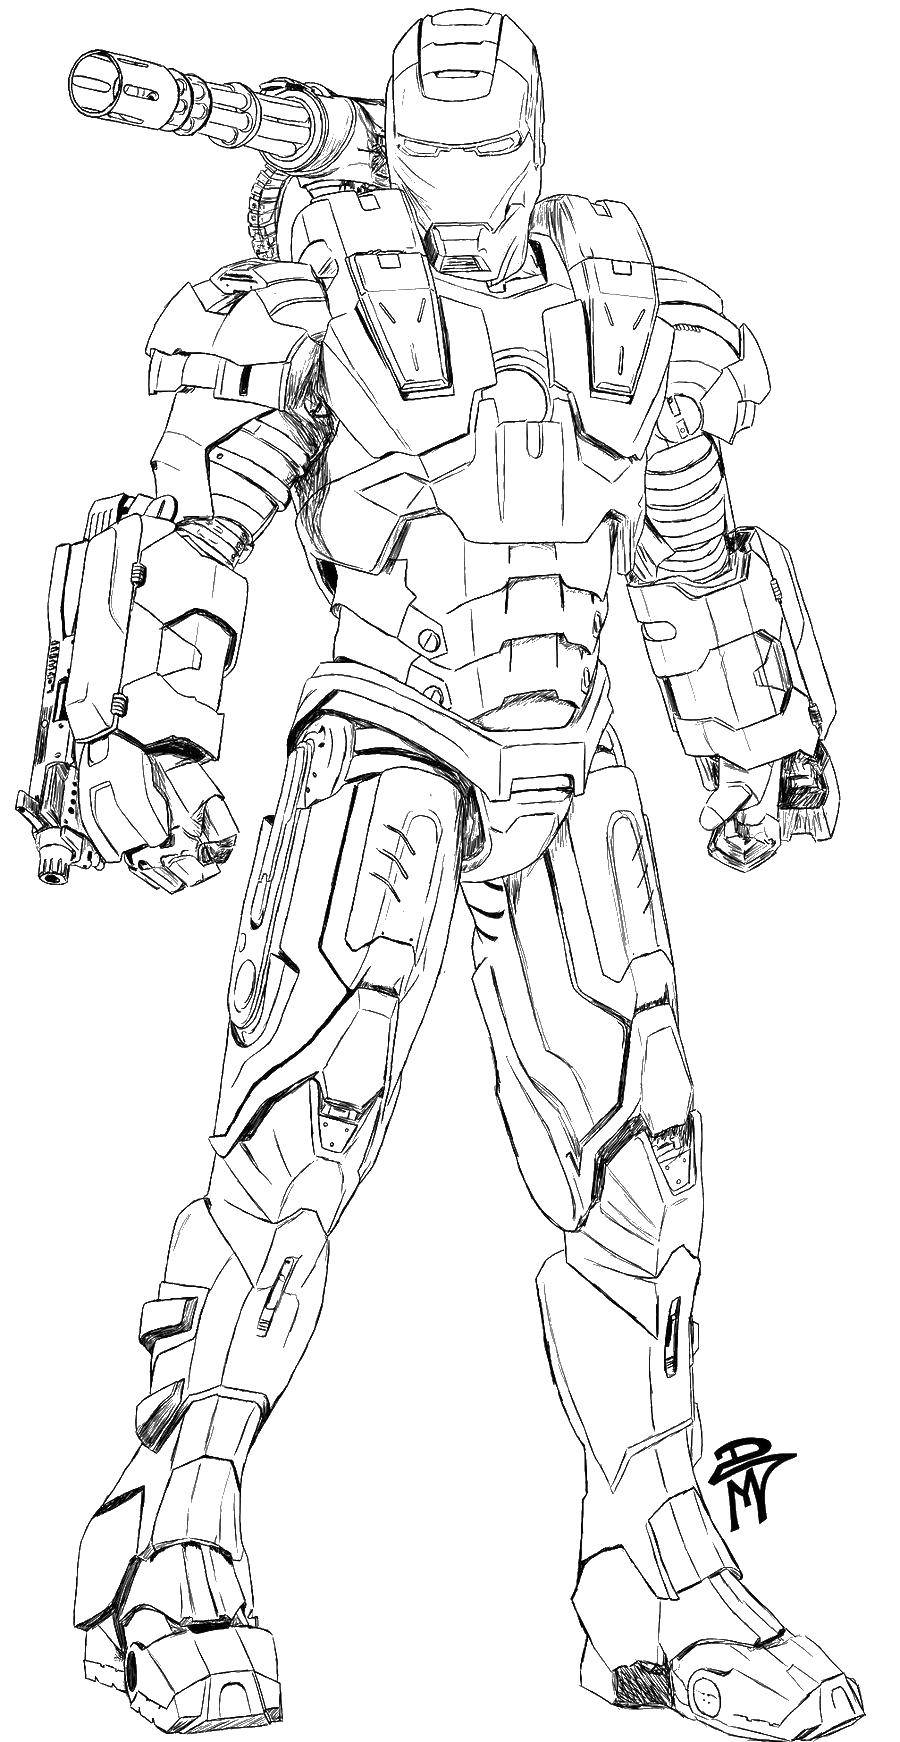 Coloring The iron man suit. Category For boys . Tags:  the exoskeleton.